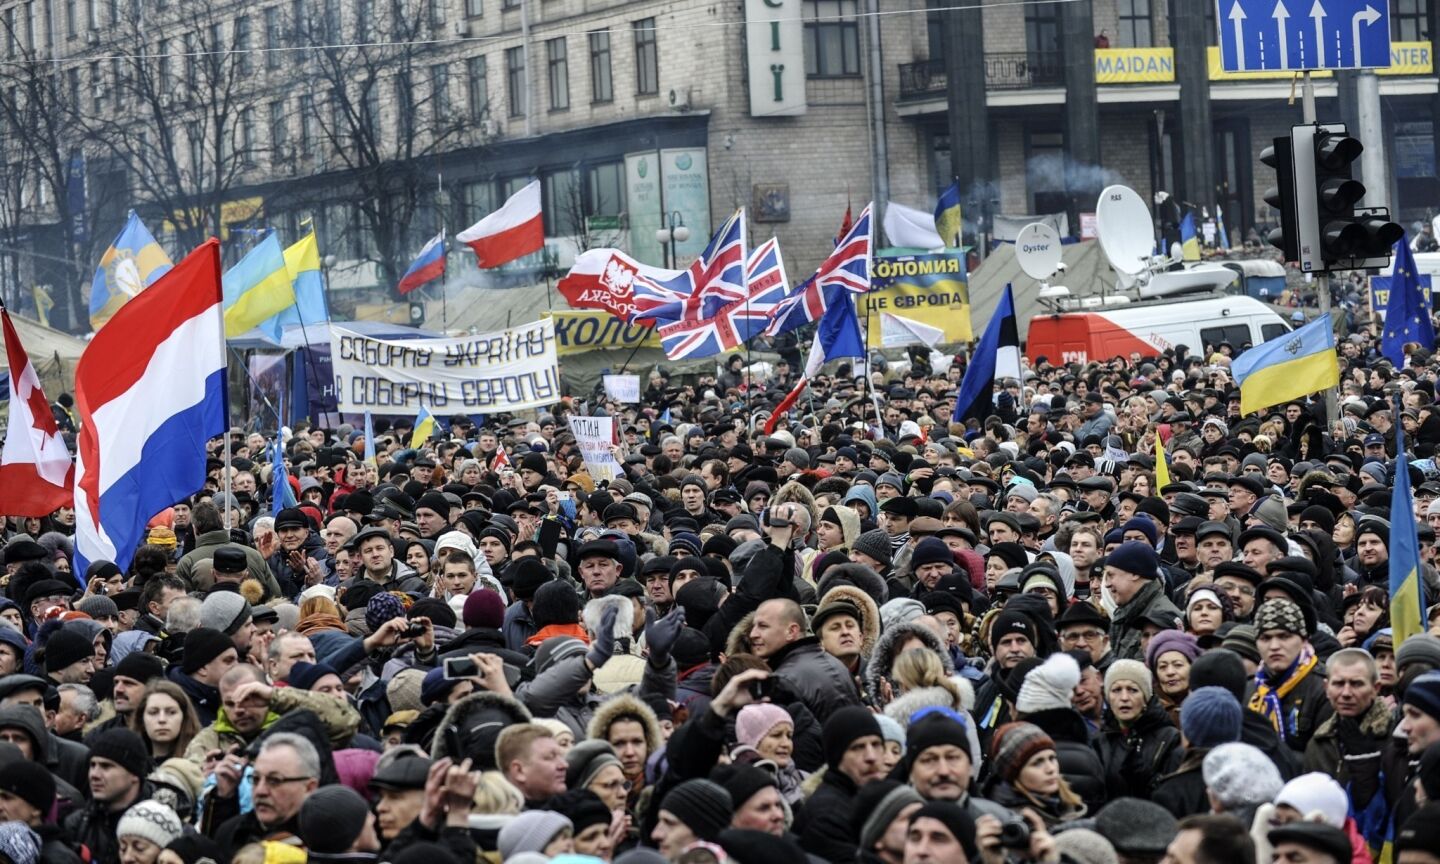 Ukrainians wave various national flags at a rally against Russian intervention in Kiev's Independence Square.